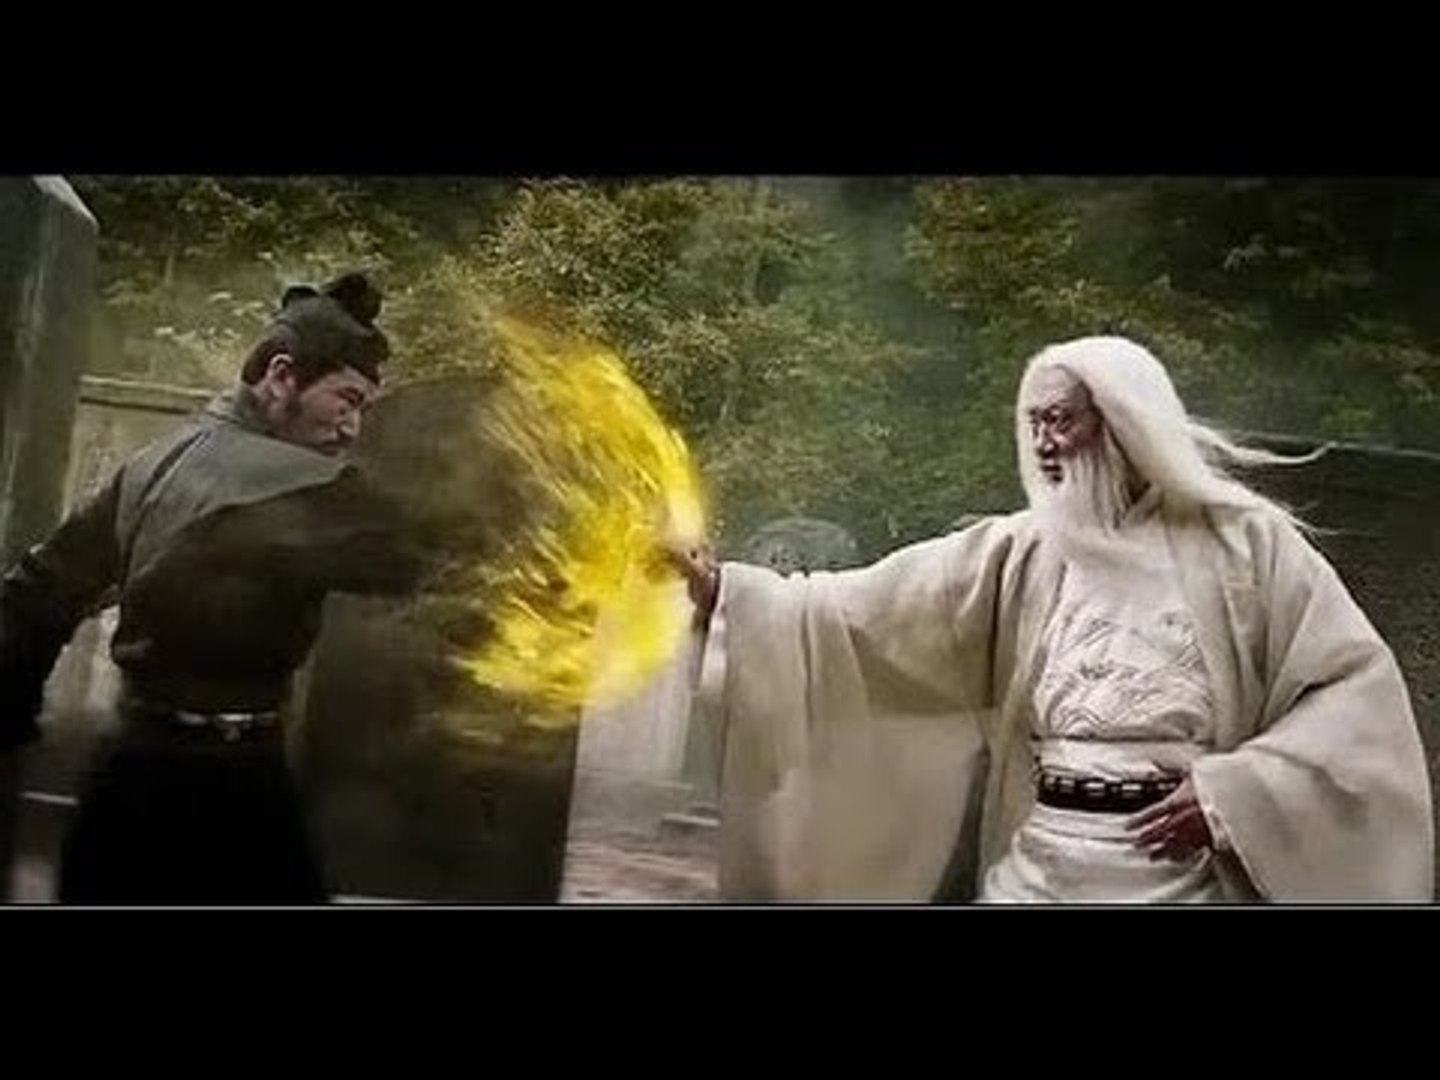 New Kung Fu Action Movies 2017 -- Best Chinese Action Movies Full Length English Movies